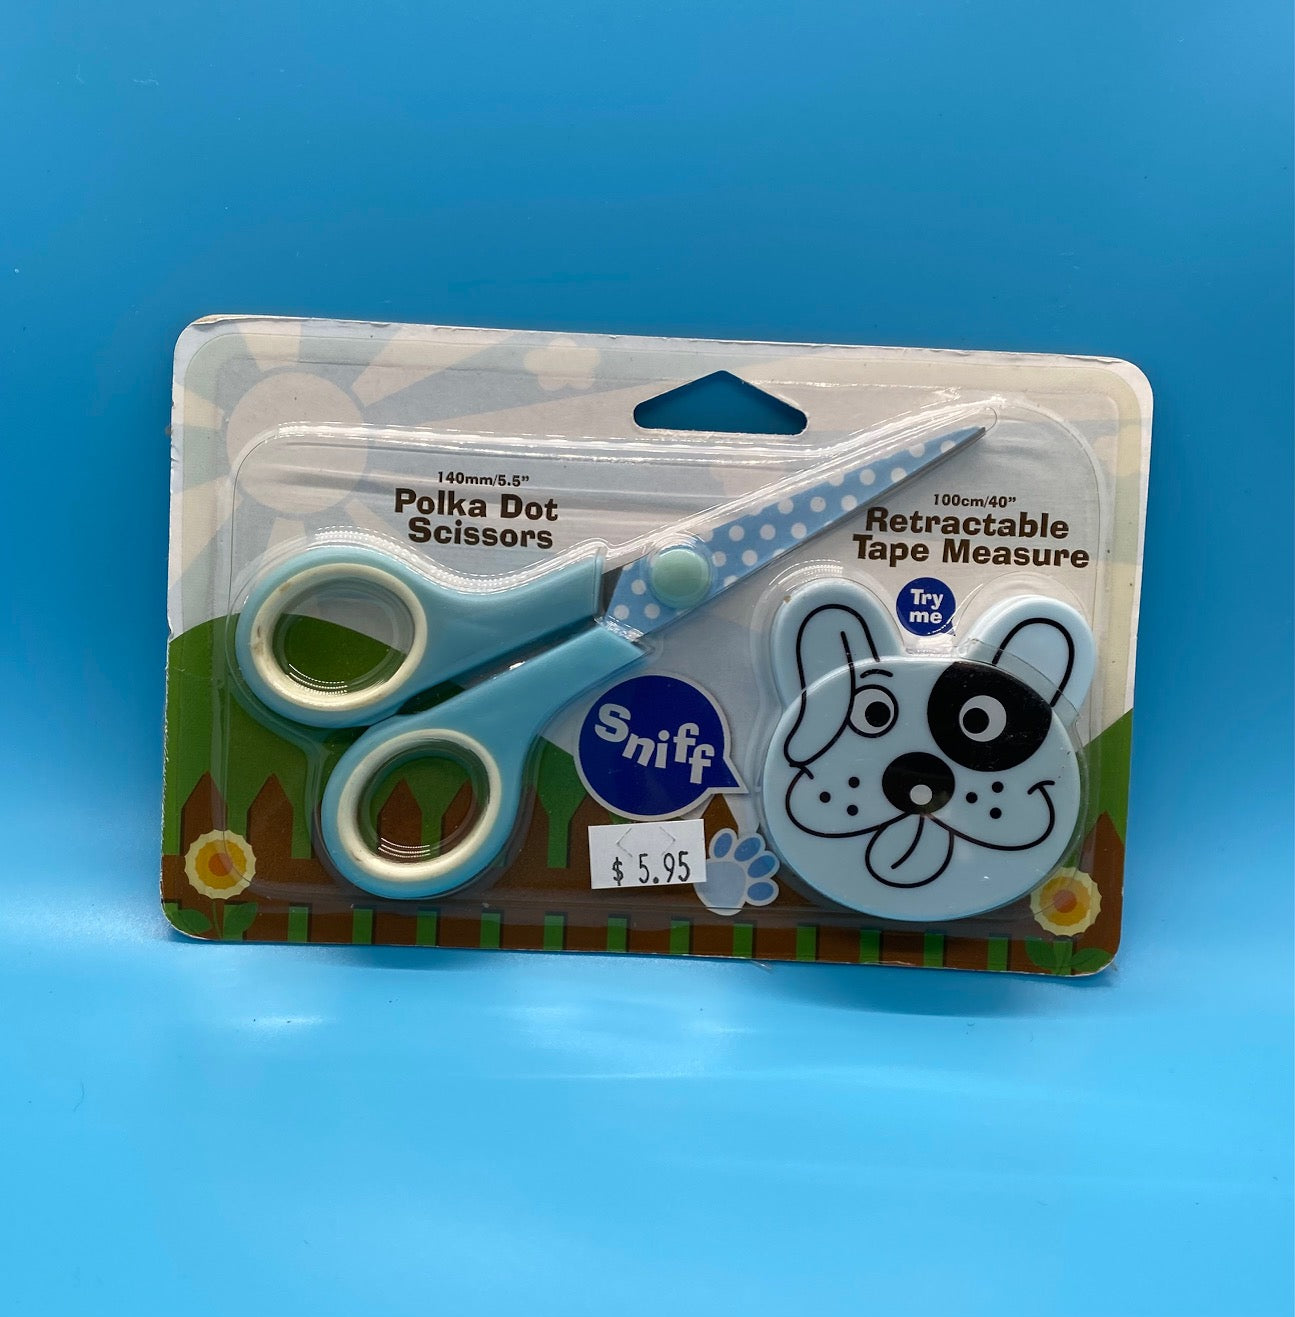 Scissors and tape measure set for kids - Blue with polka dots and